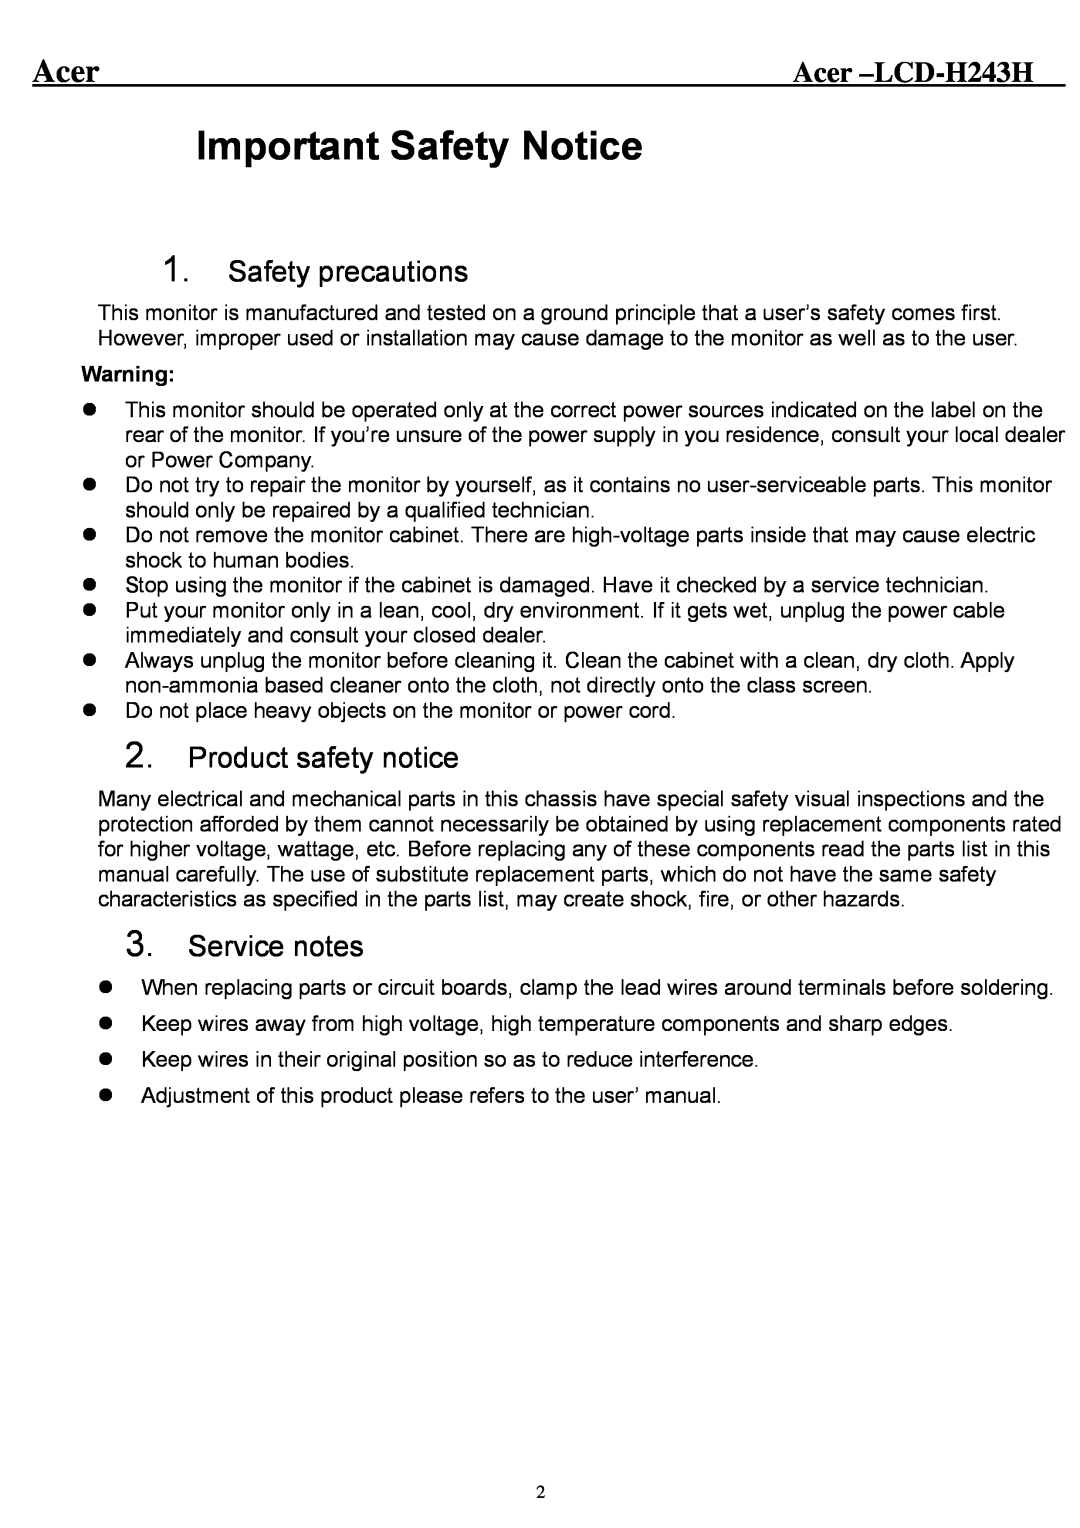 Acer Important Safety Notice, Acer -LCD-H243H, Safety precautions, Product safety notice, Service notes 